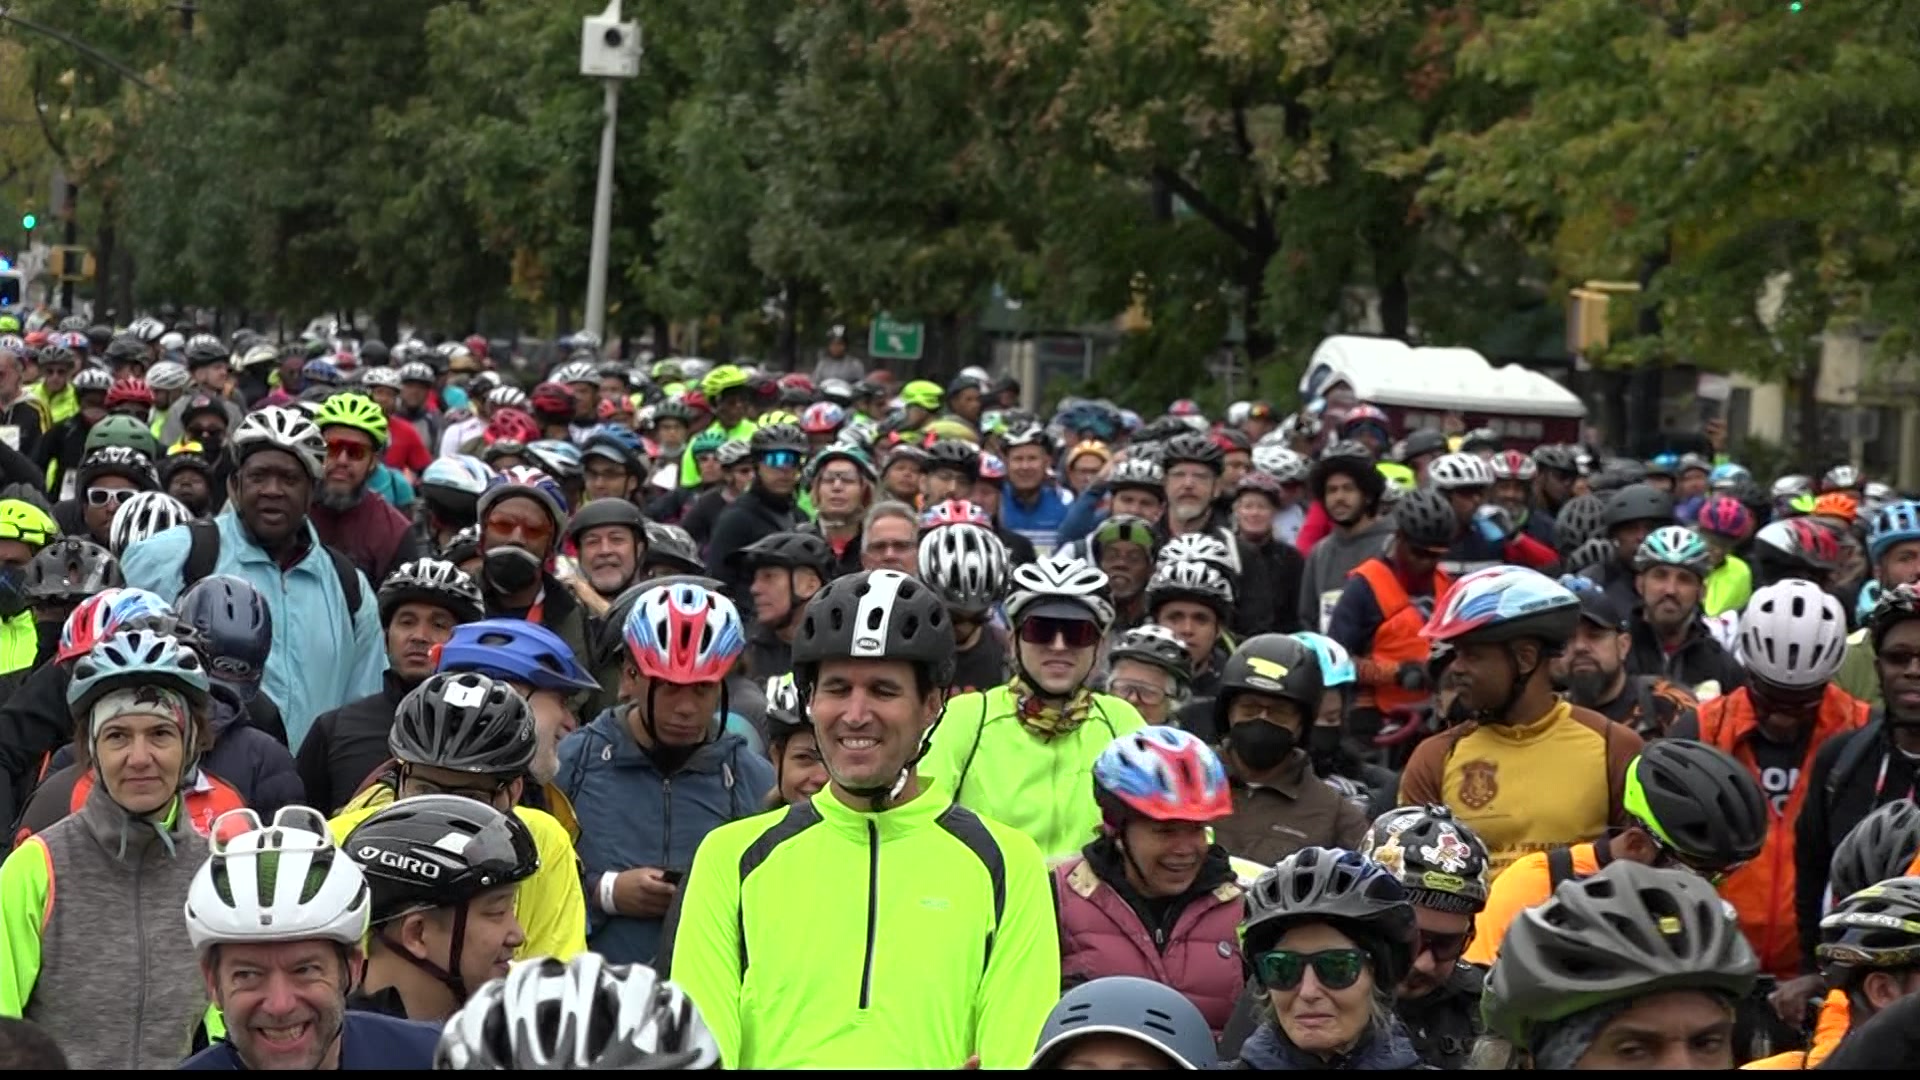 Hundreds of cyclists hit the streets for 28th annual Tour de Bronx